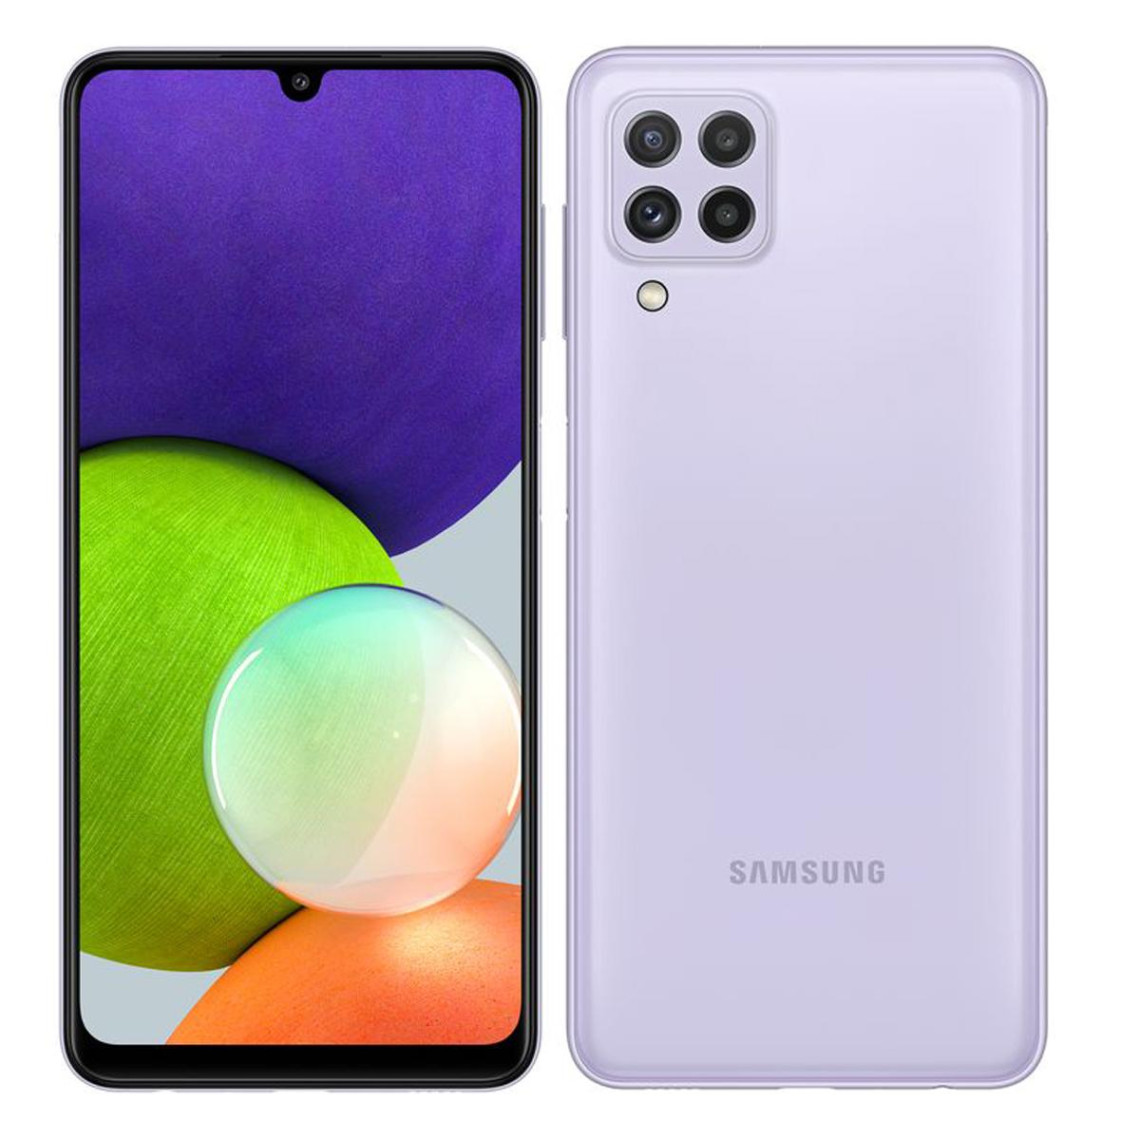 Smartphone Android Samsung Galaxy A22 - 4G - 64 Go - Violet